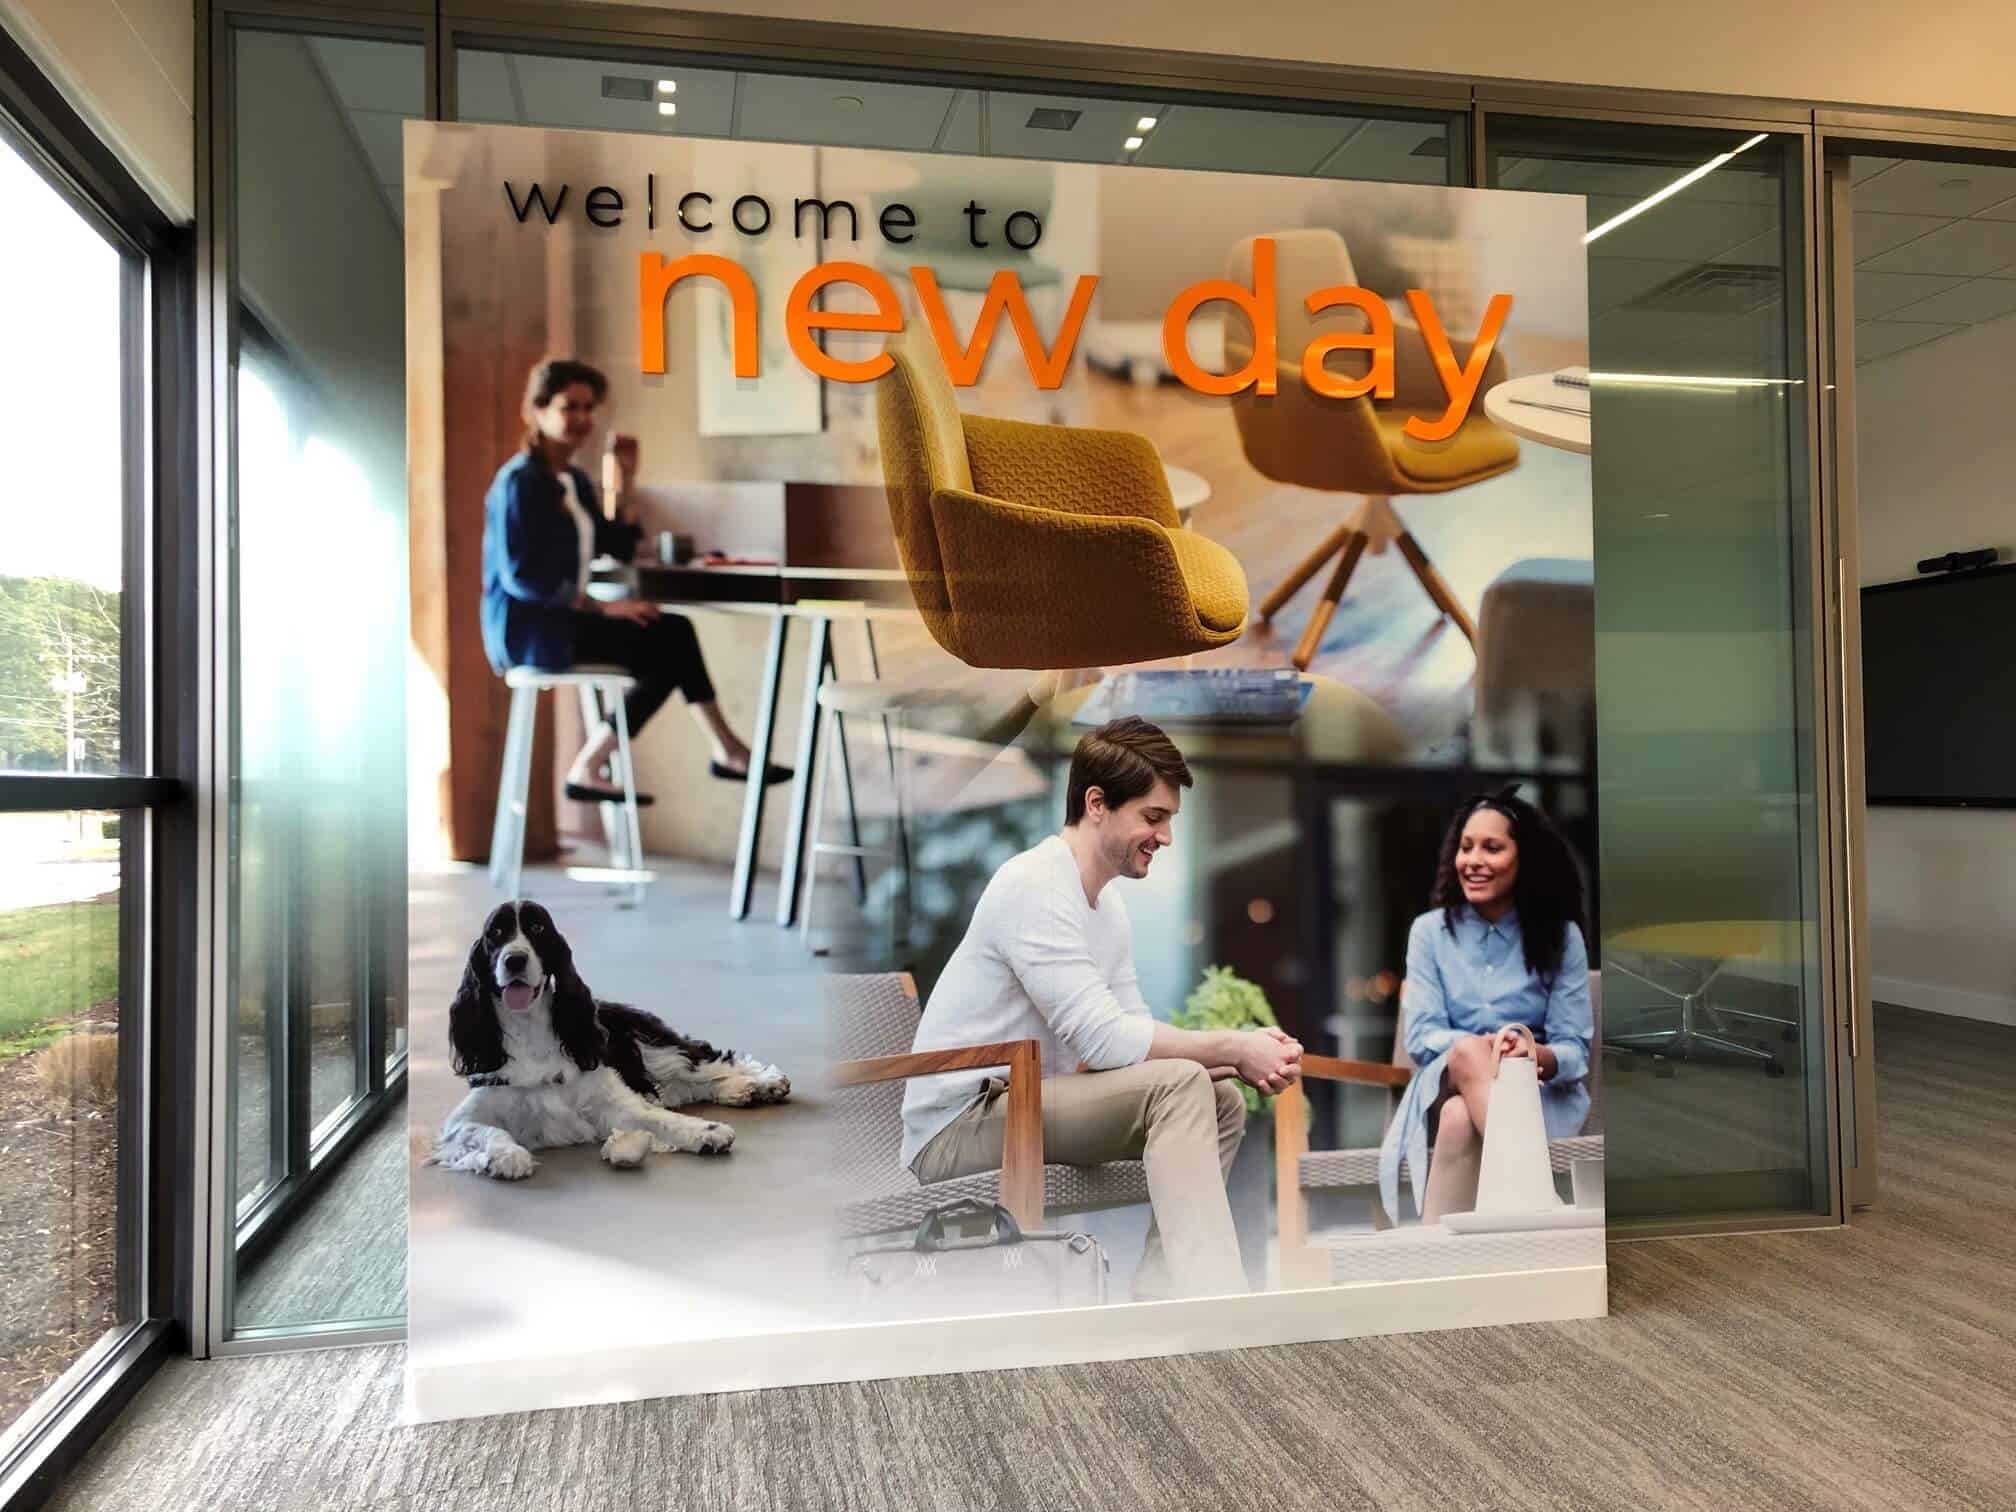 Retail store wall mural for New Day Office Supply by DeSigns, Inc.